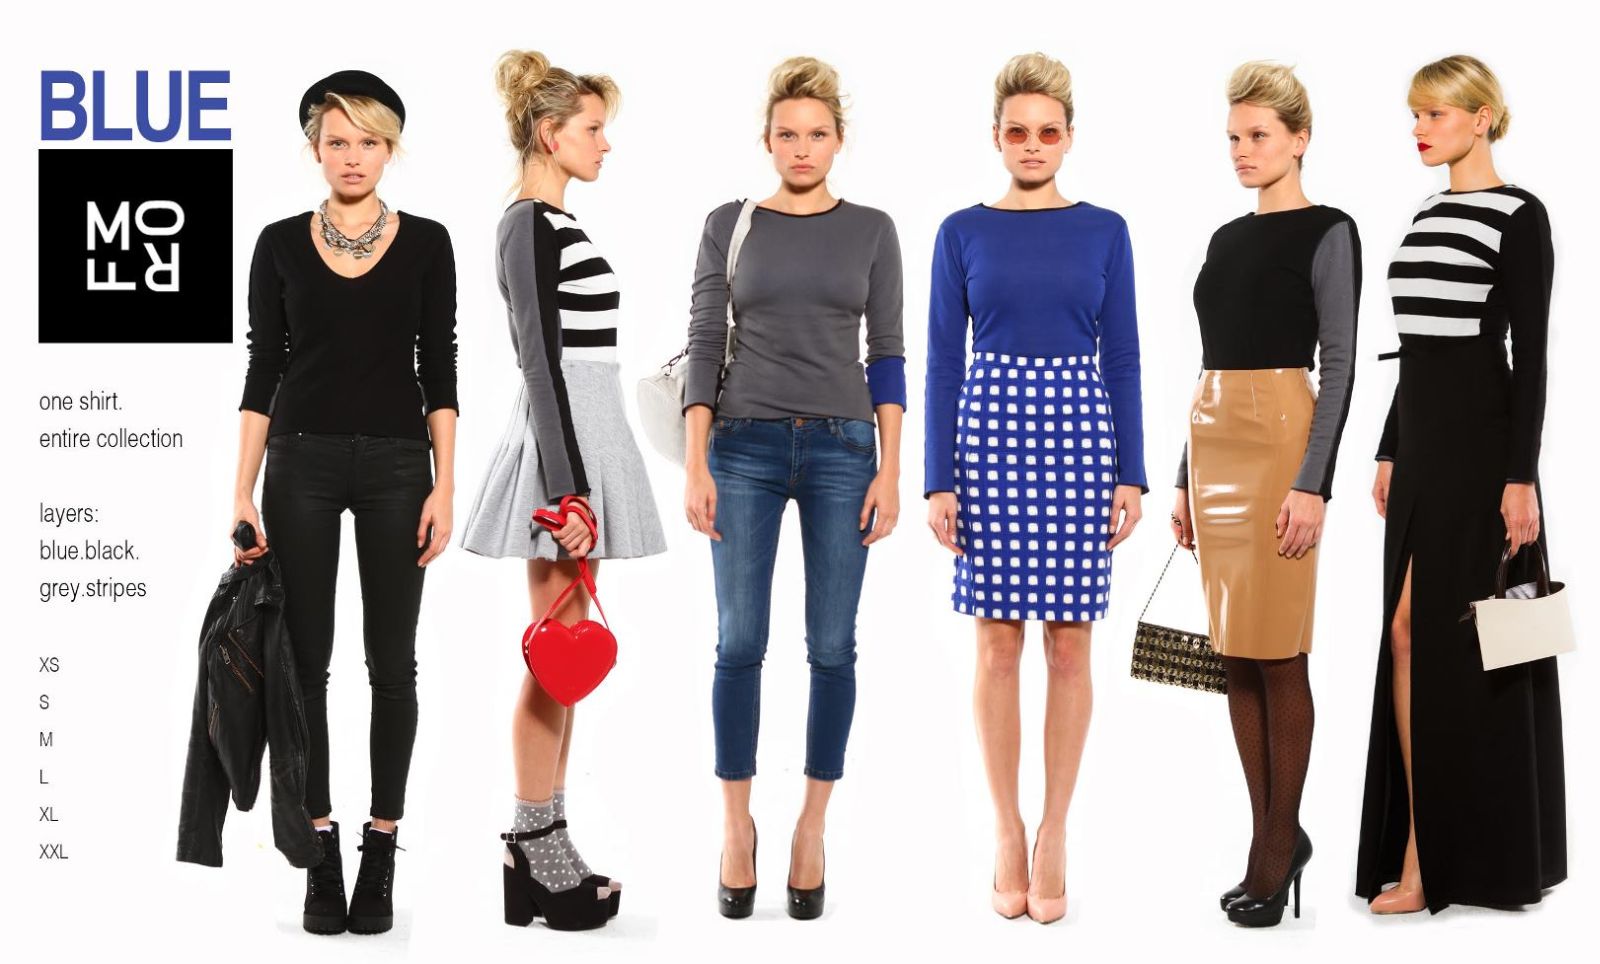 different outfit styles for ladies OFF 65%